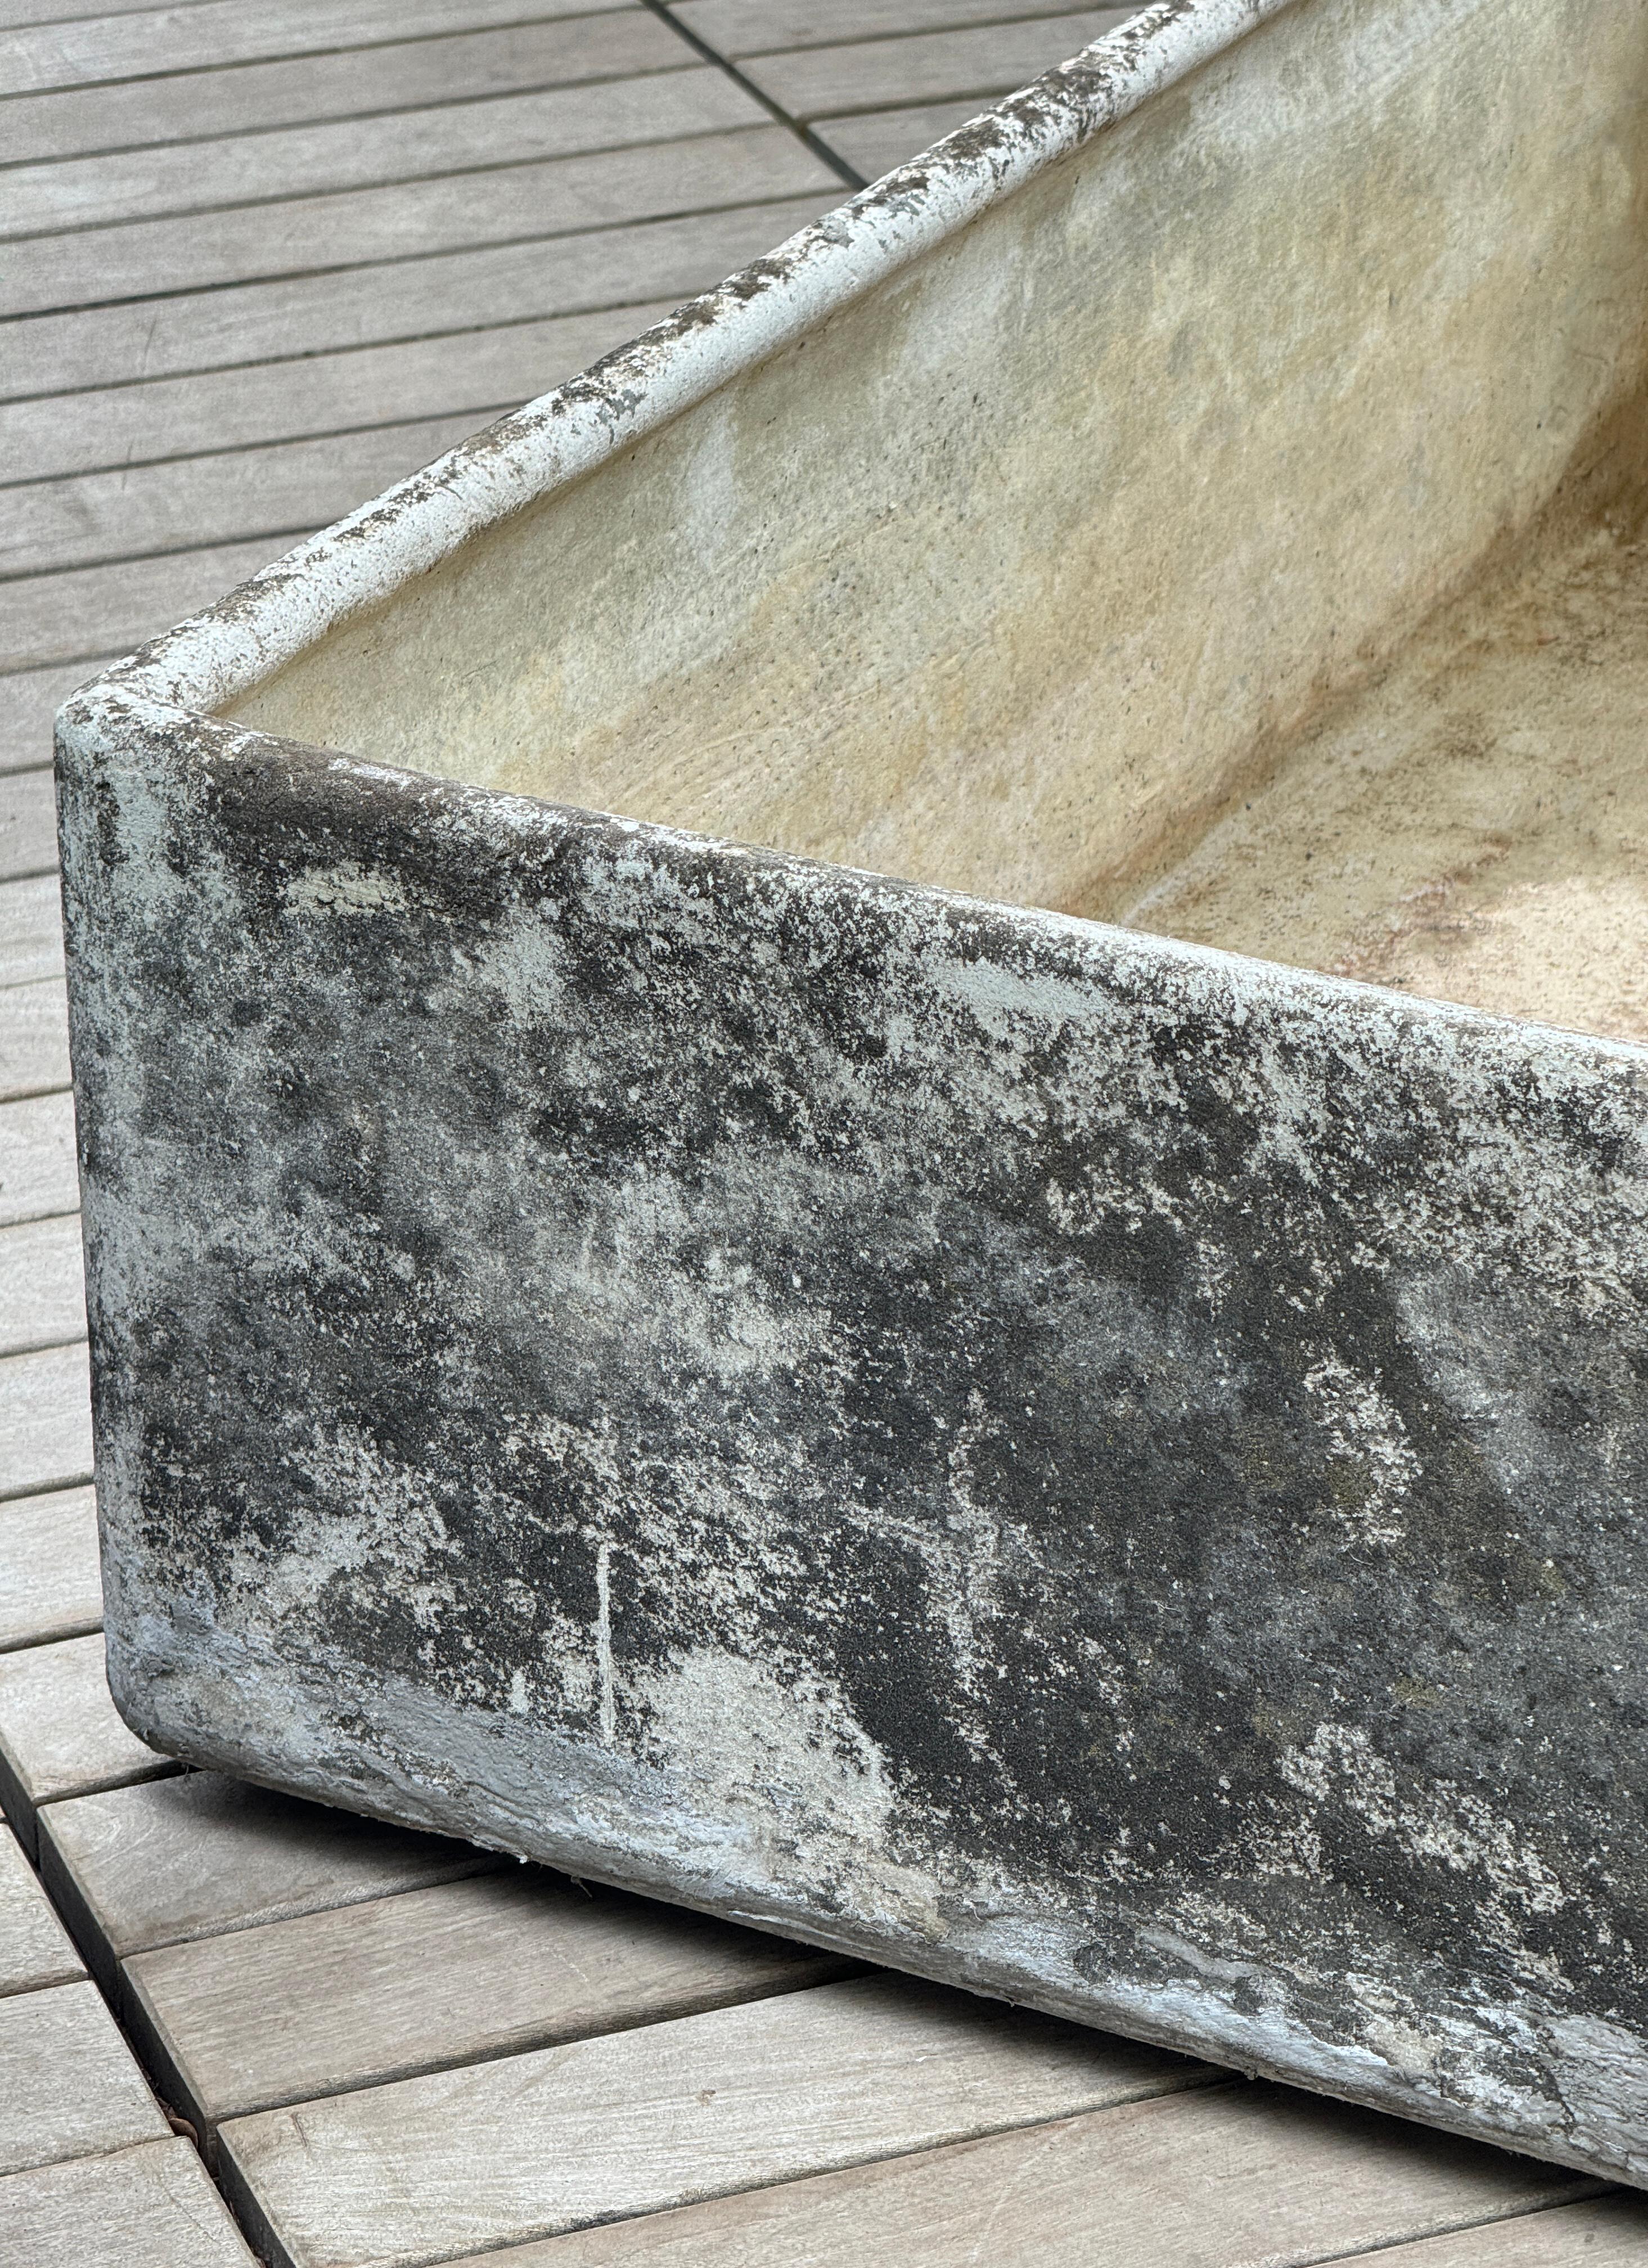 Concrete Midcentury Rare Square Planter by Swiss Architect Willy Guhl for Eternit, 1960s For Sale